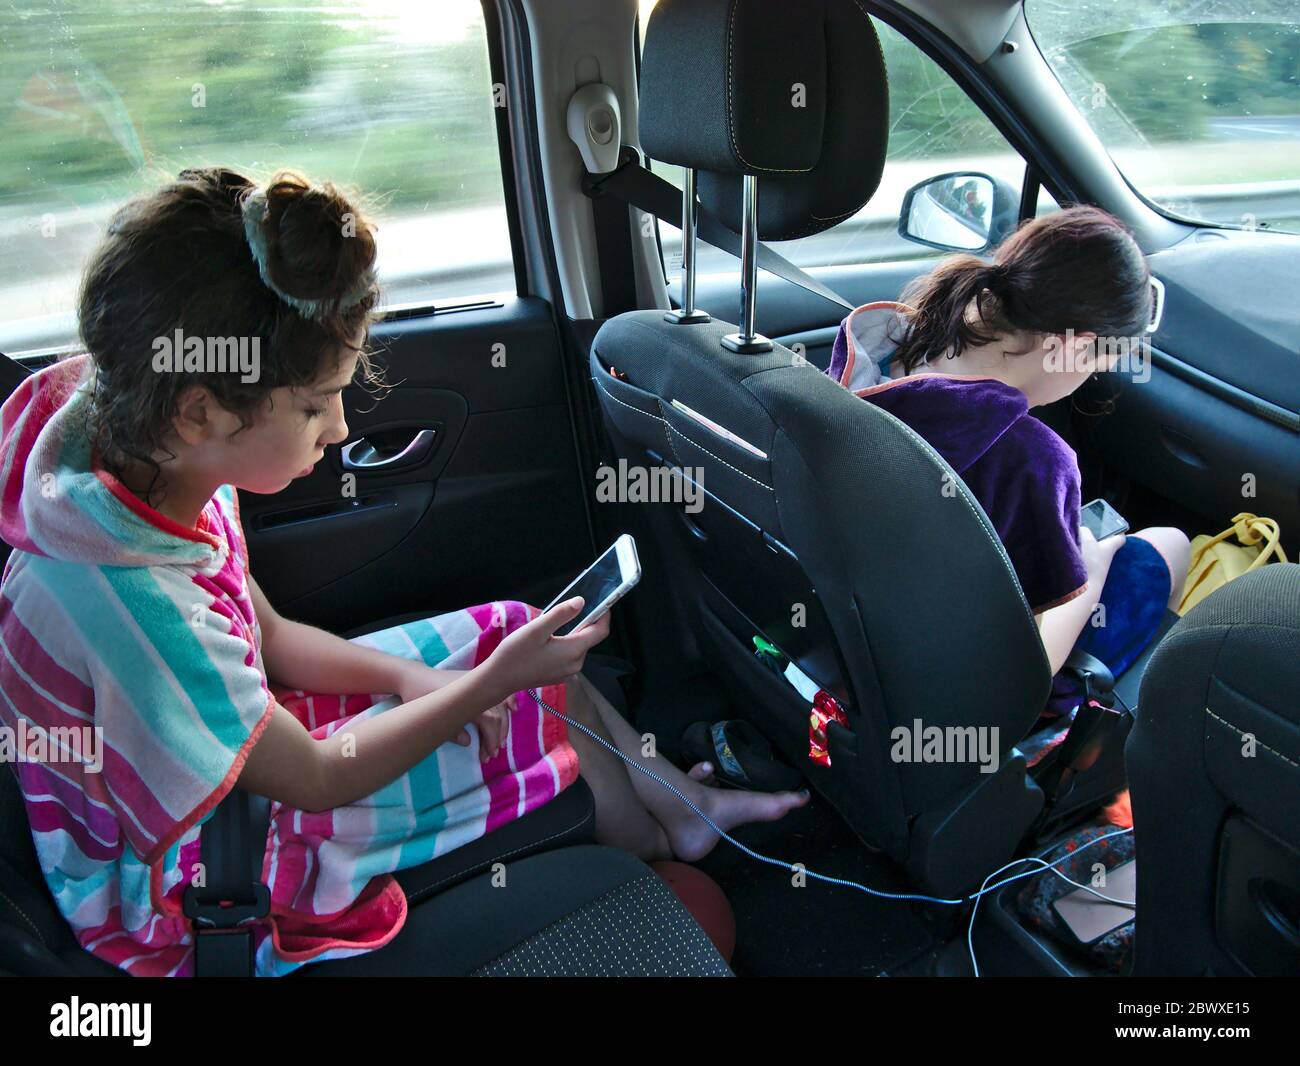 Children travelling in car looking at their smartphones. Stock Photo